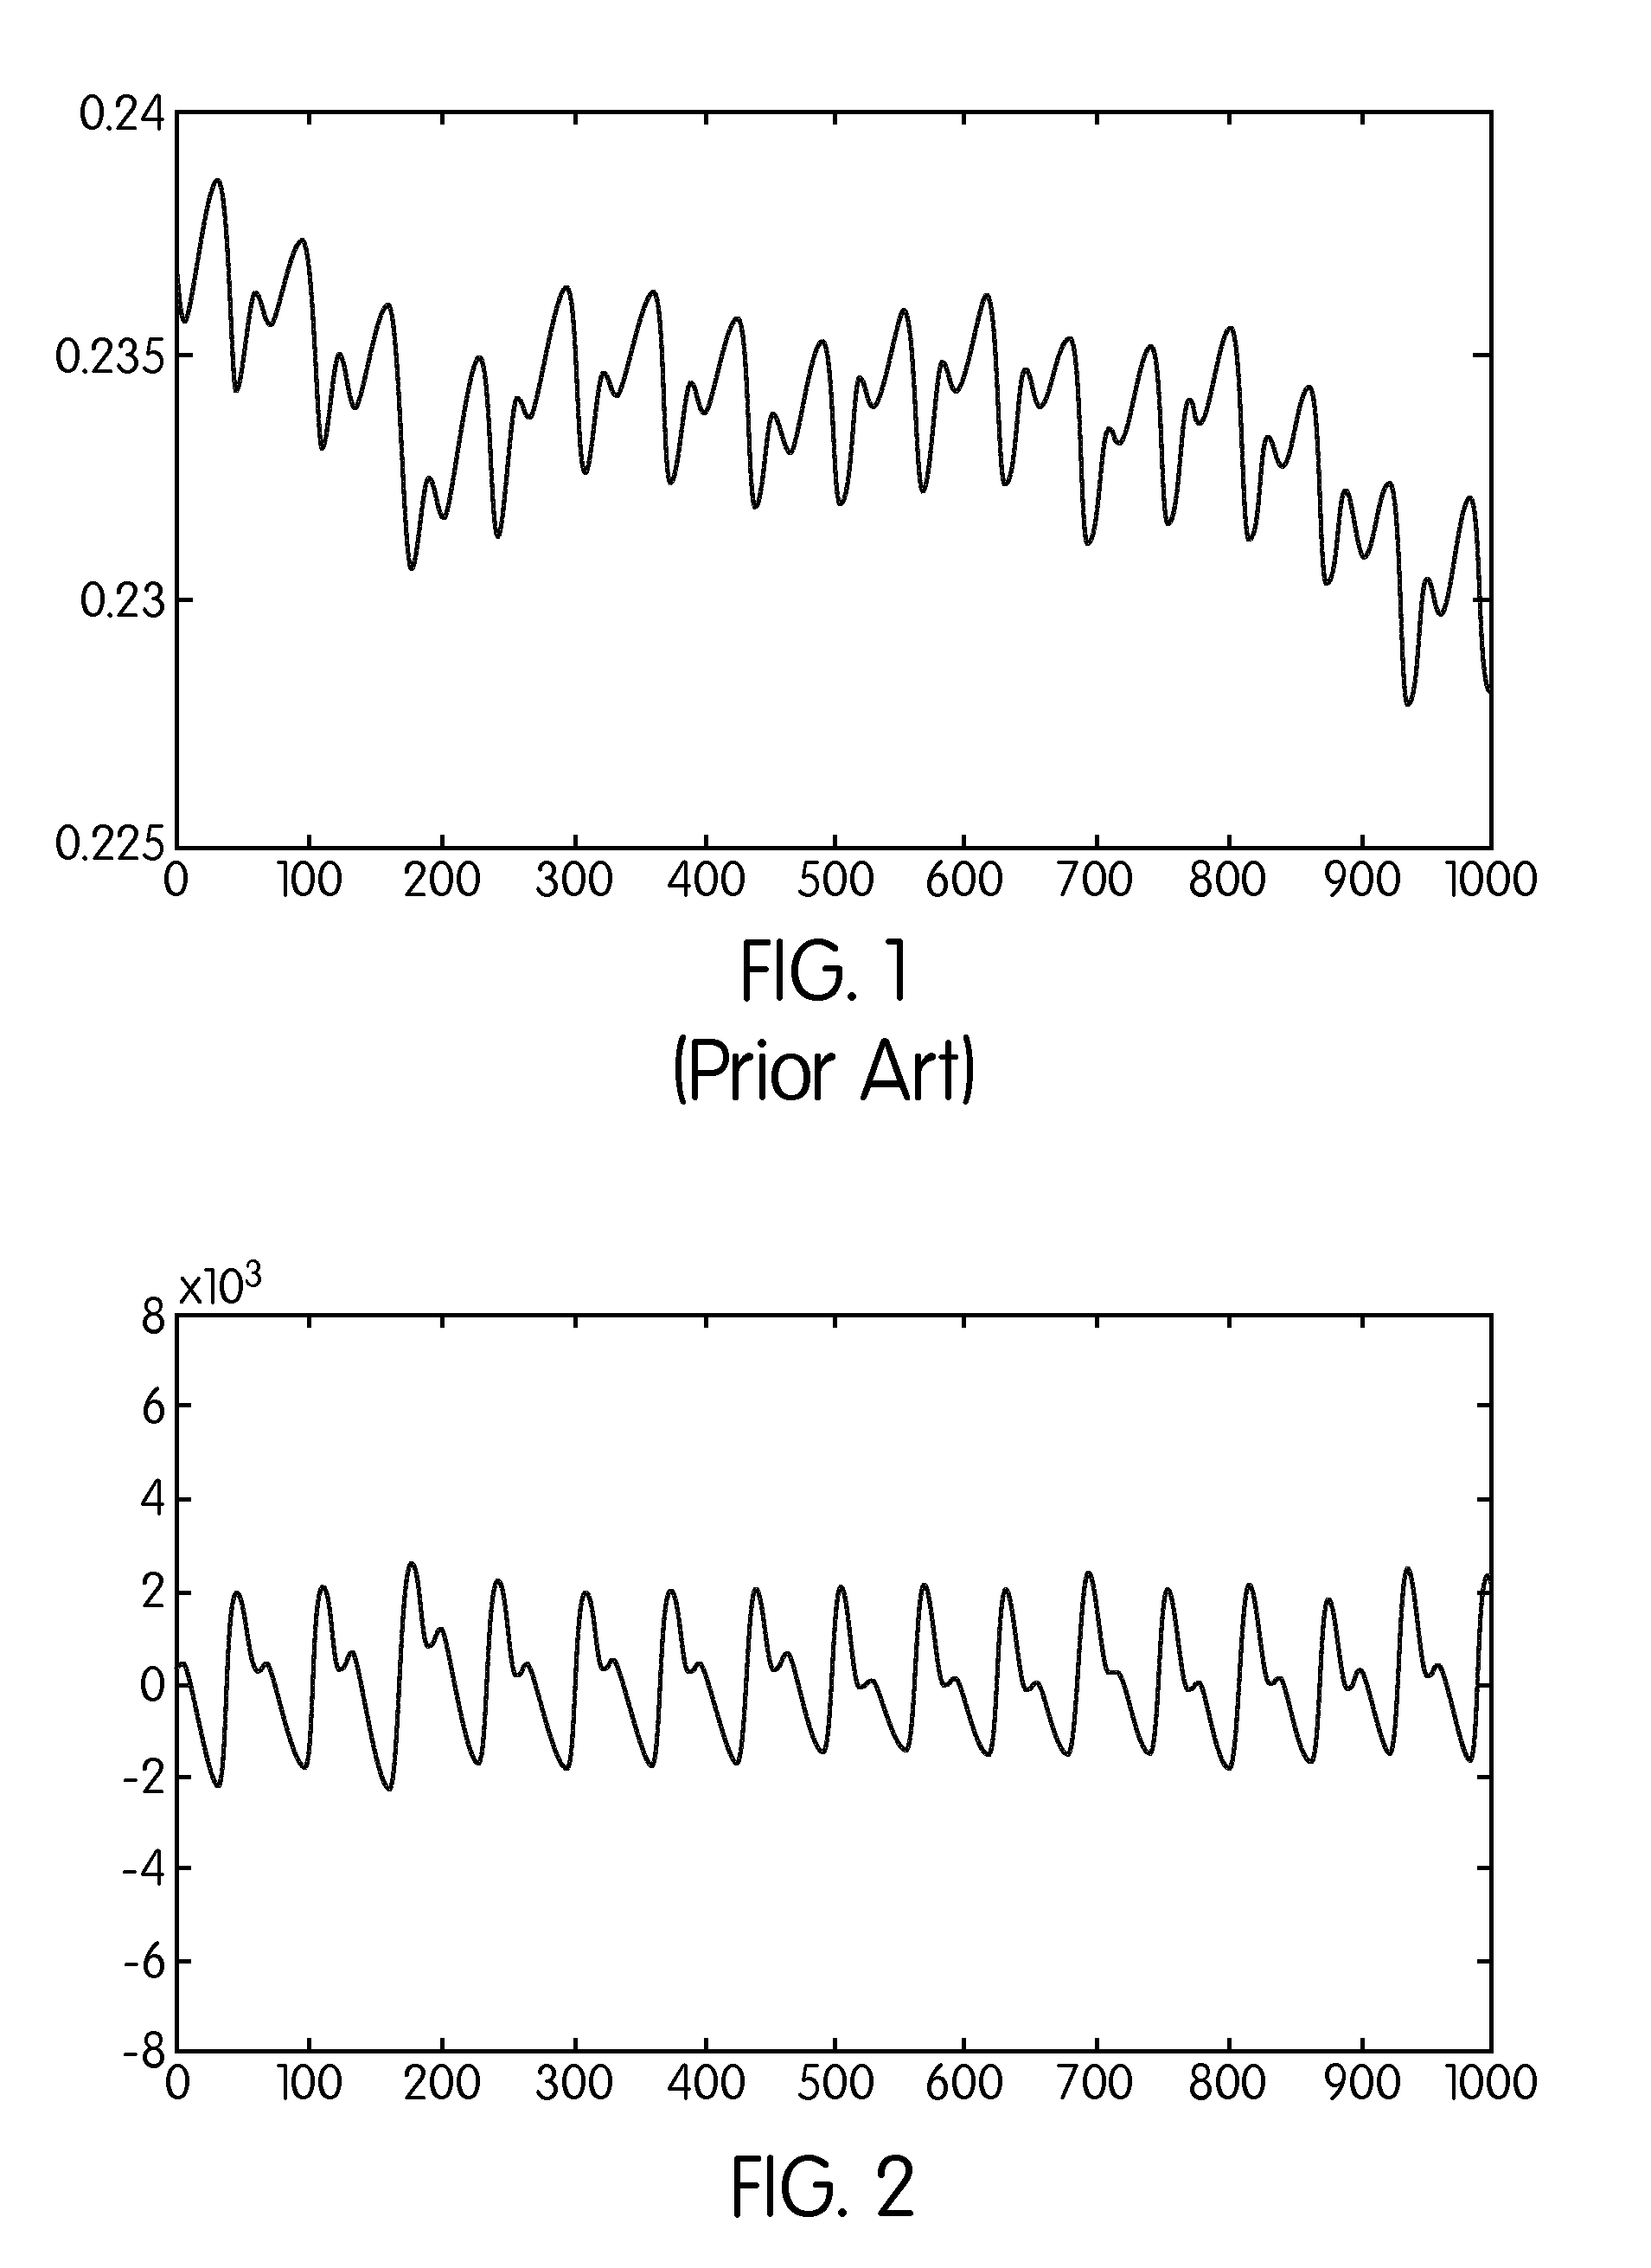 Systems and Methods for Measuring Hydration in a Human Subject